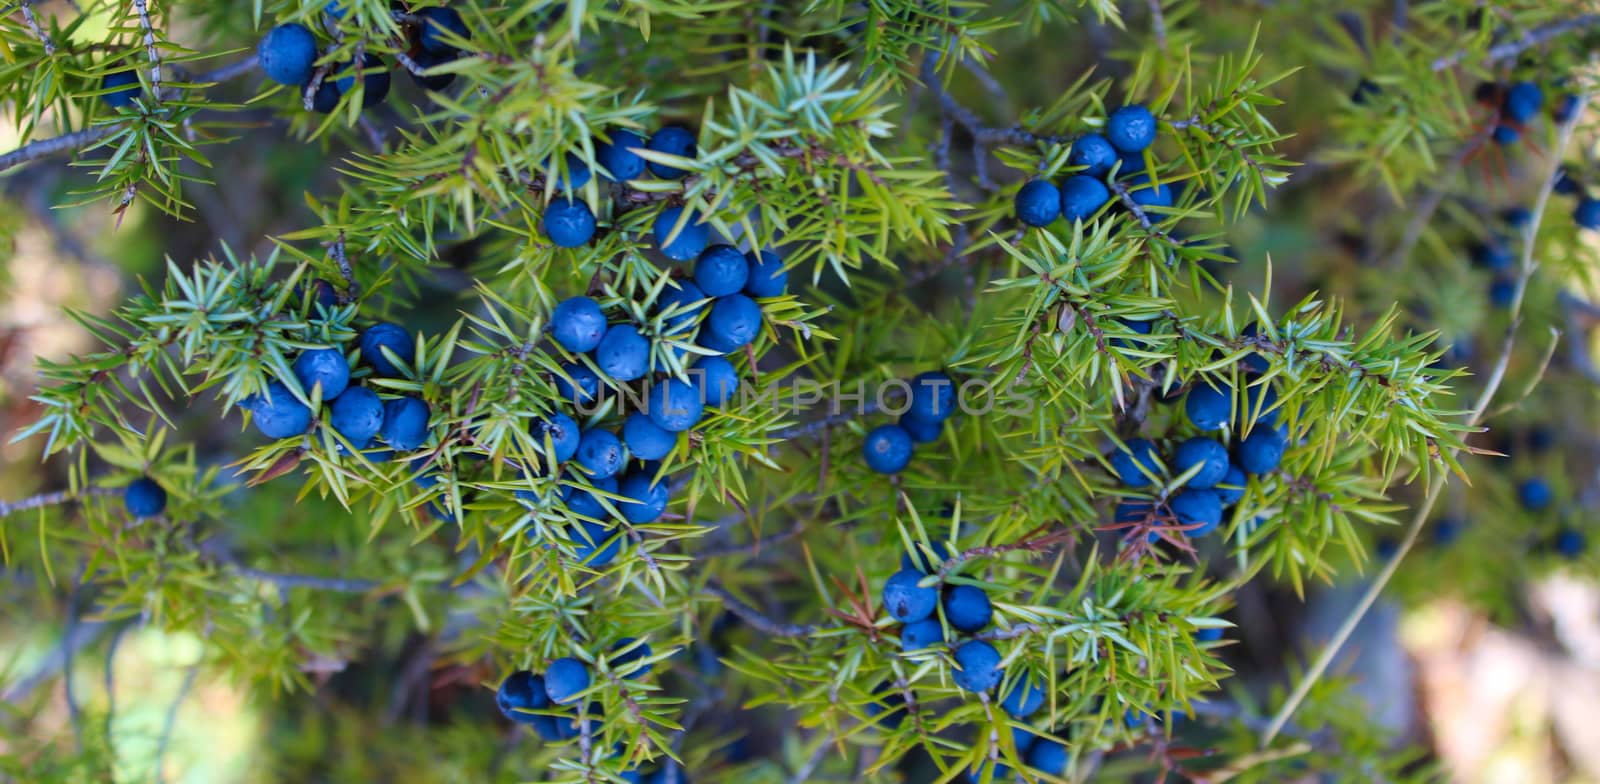 Banner of lots of ripe navy blue juniper berries all over the branch between the green needles. Juniperus communis fruit. by mahirrov